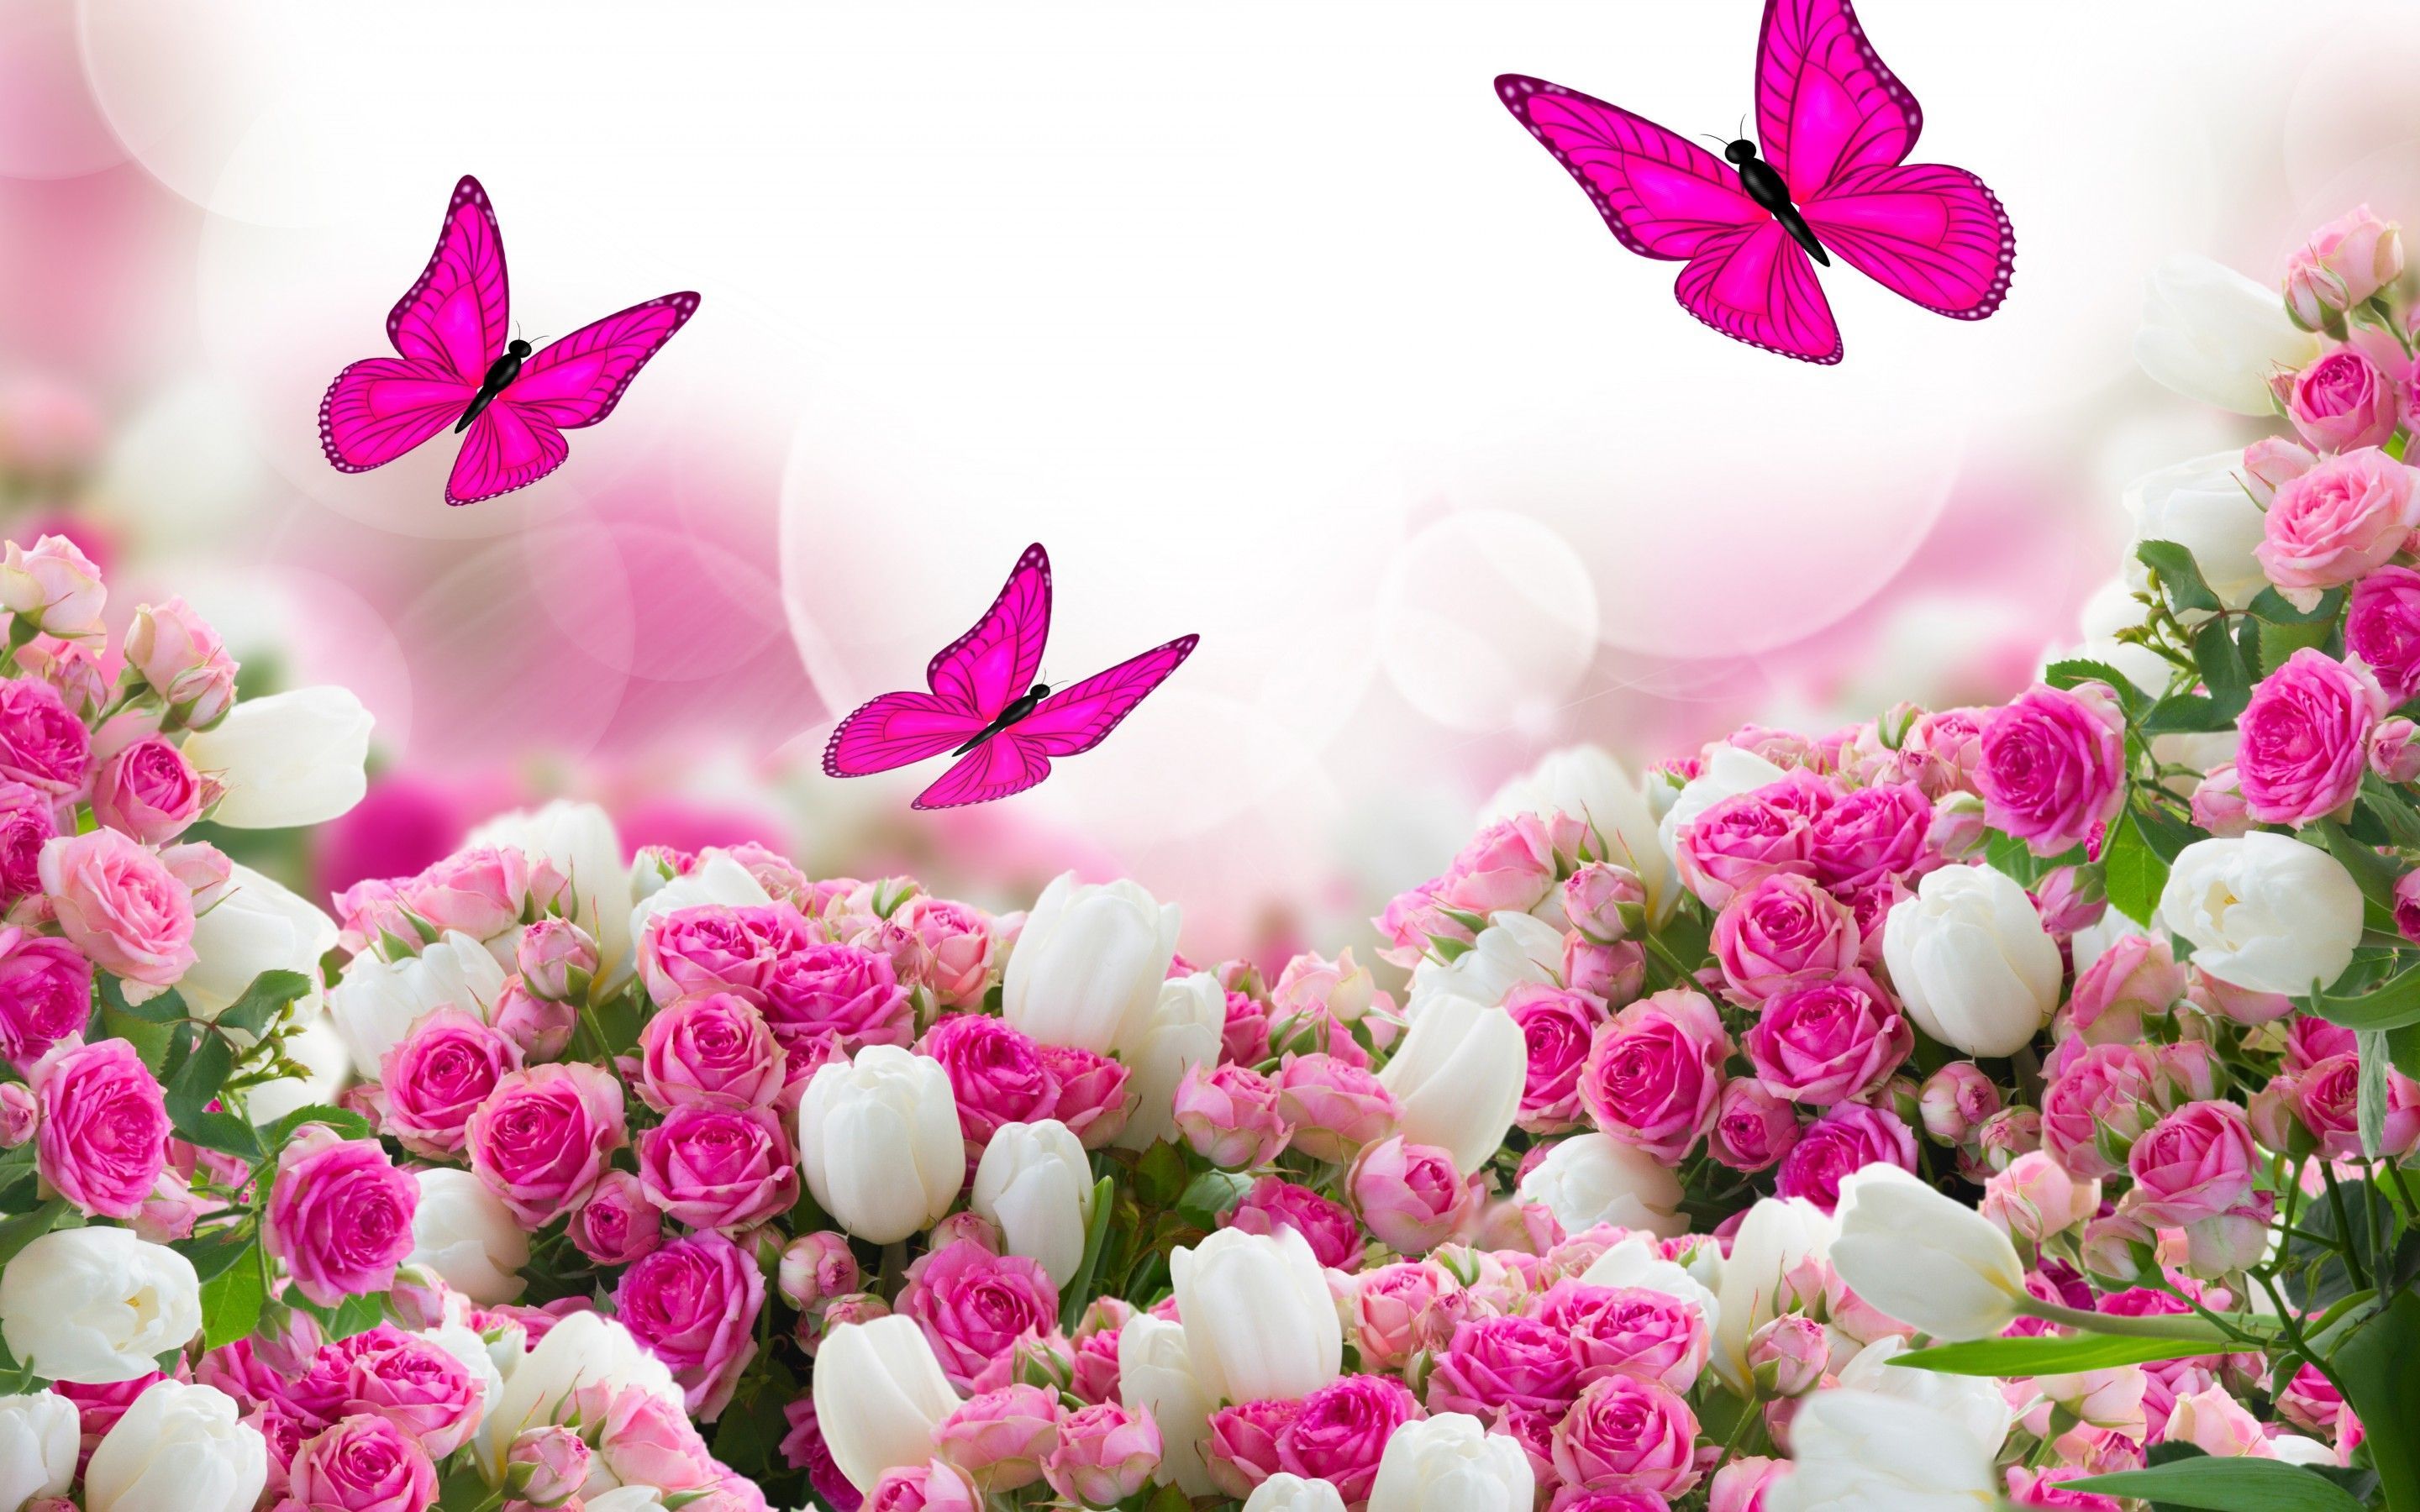 Free download 60 Pink Roses and Butterfly Wallpaper Download [2880x1800] for your Desktop, Mobile & Tablet. Explore Roses Butterfly Wallpaper. Roses Butterfly Wallpaper, Roses and Butterfly Wallpaper Border, Roses Wallpaper